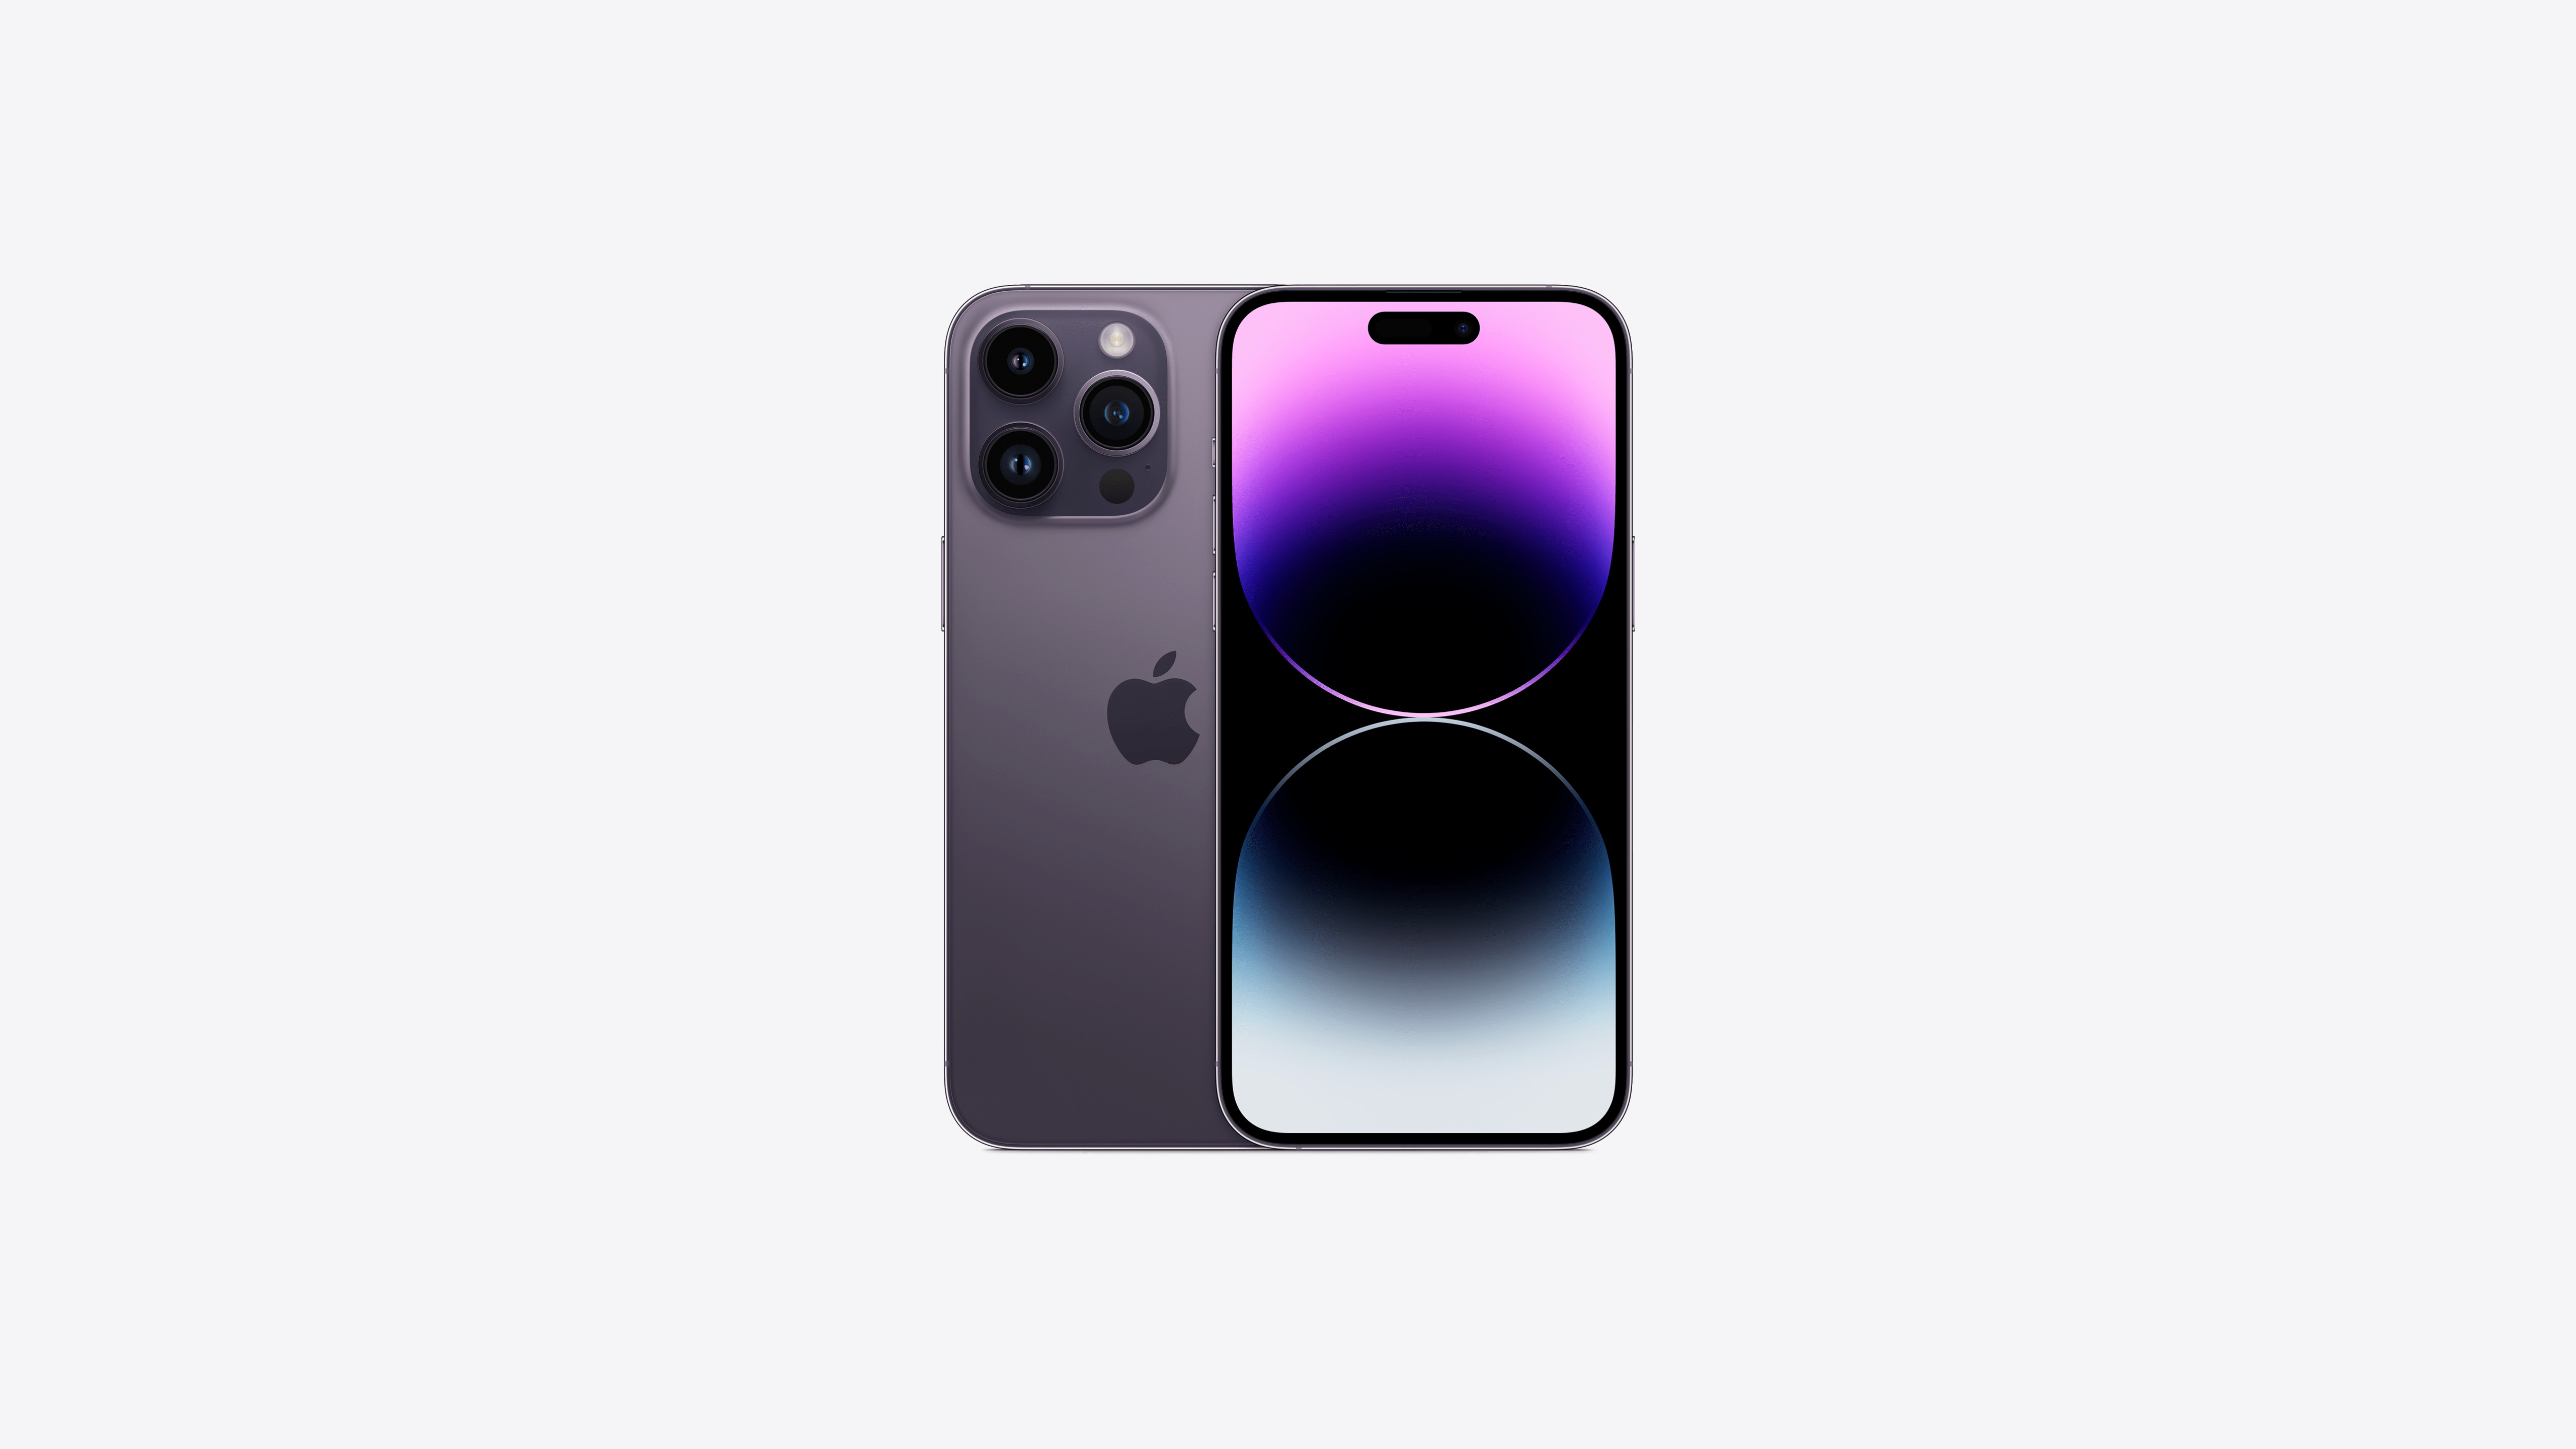 14 pro - most recent iPhone models in order